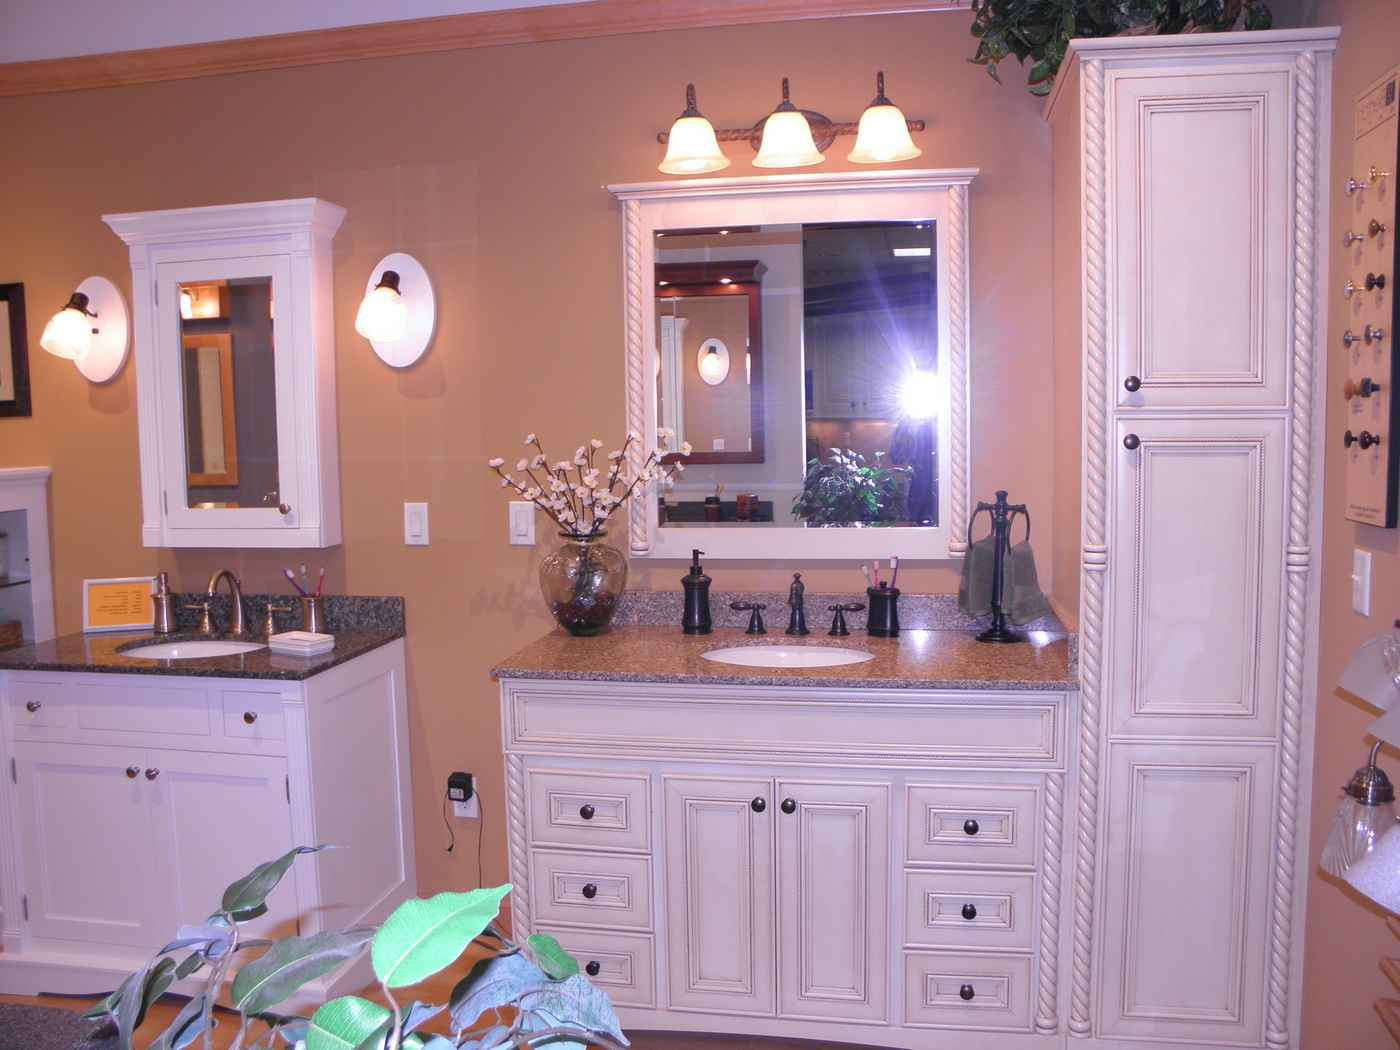 Lowes Unfinished Kitchen Cabinets
 Unfinished Cabinets Lowes u2013 Cabinets Matttroy Iky Home